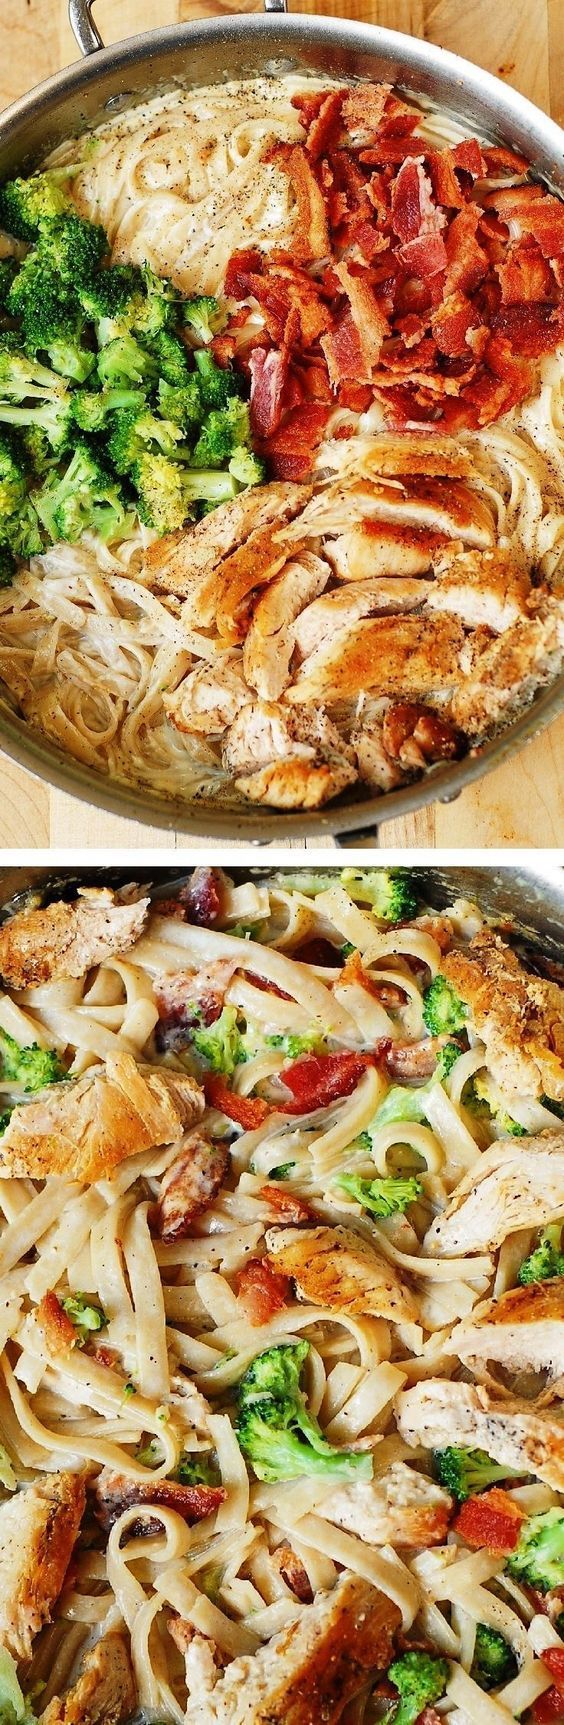 If you like pasta, chicken and bacon then this dish is for you! #Fallrecipes